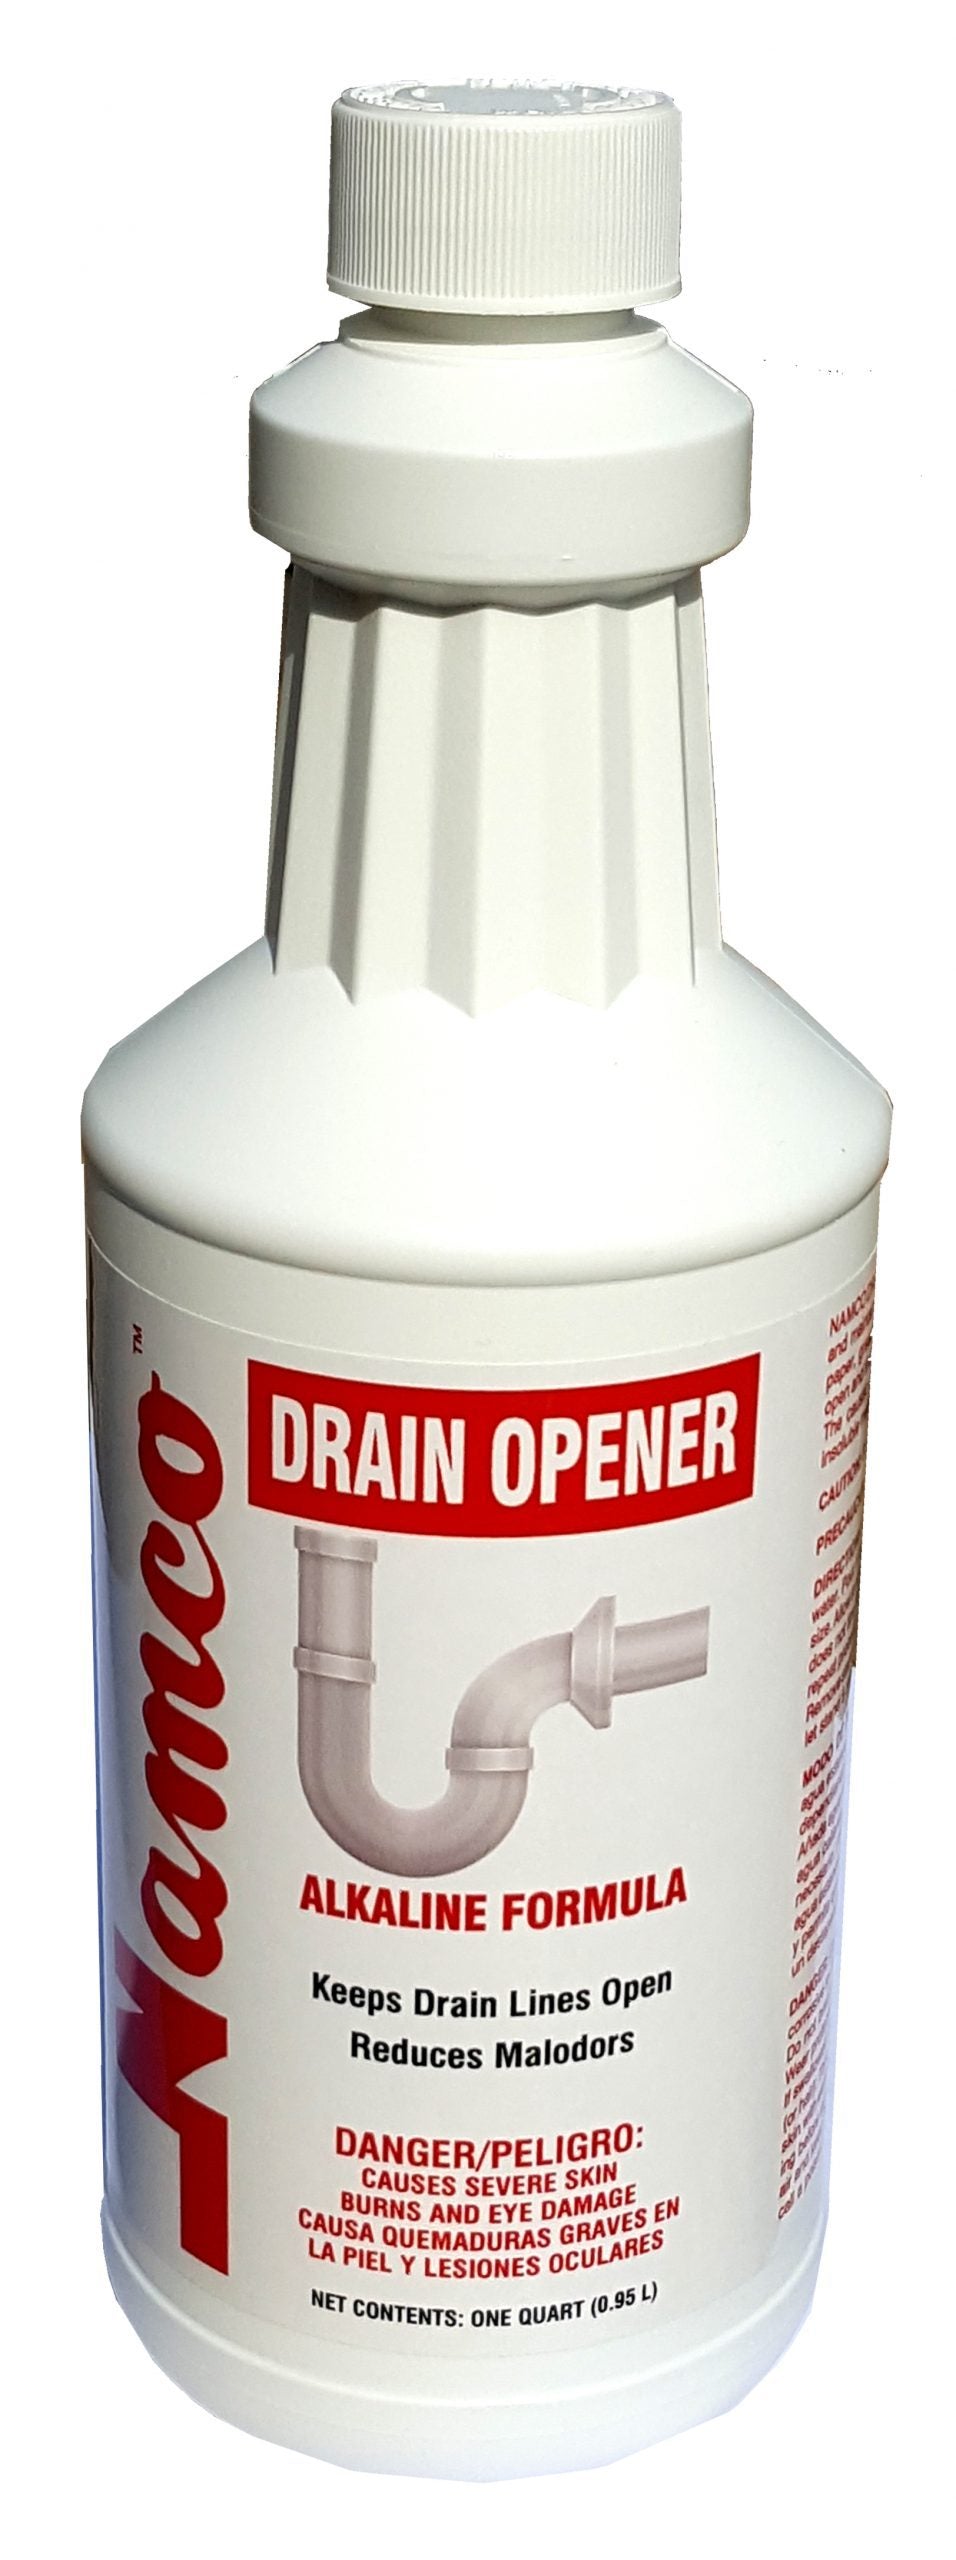 Commercial Drain Cleaner Chemicals & Sewer Maintenance